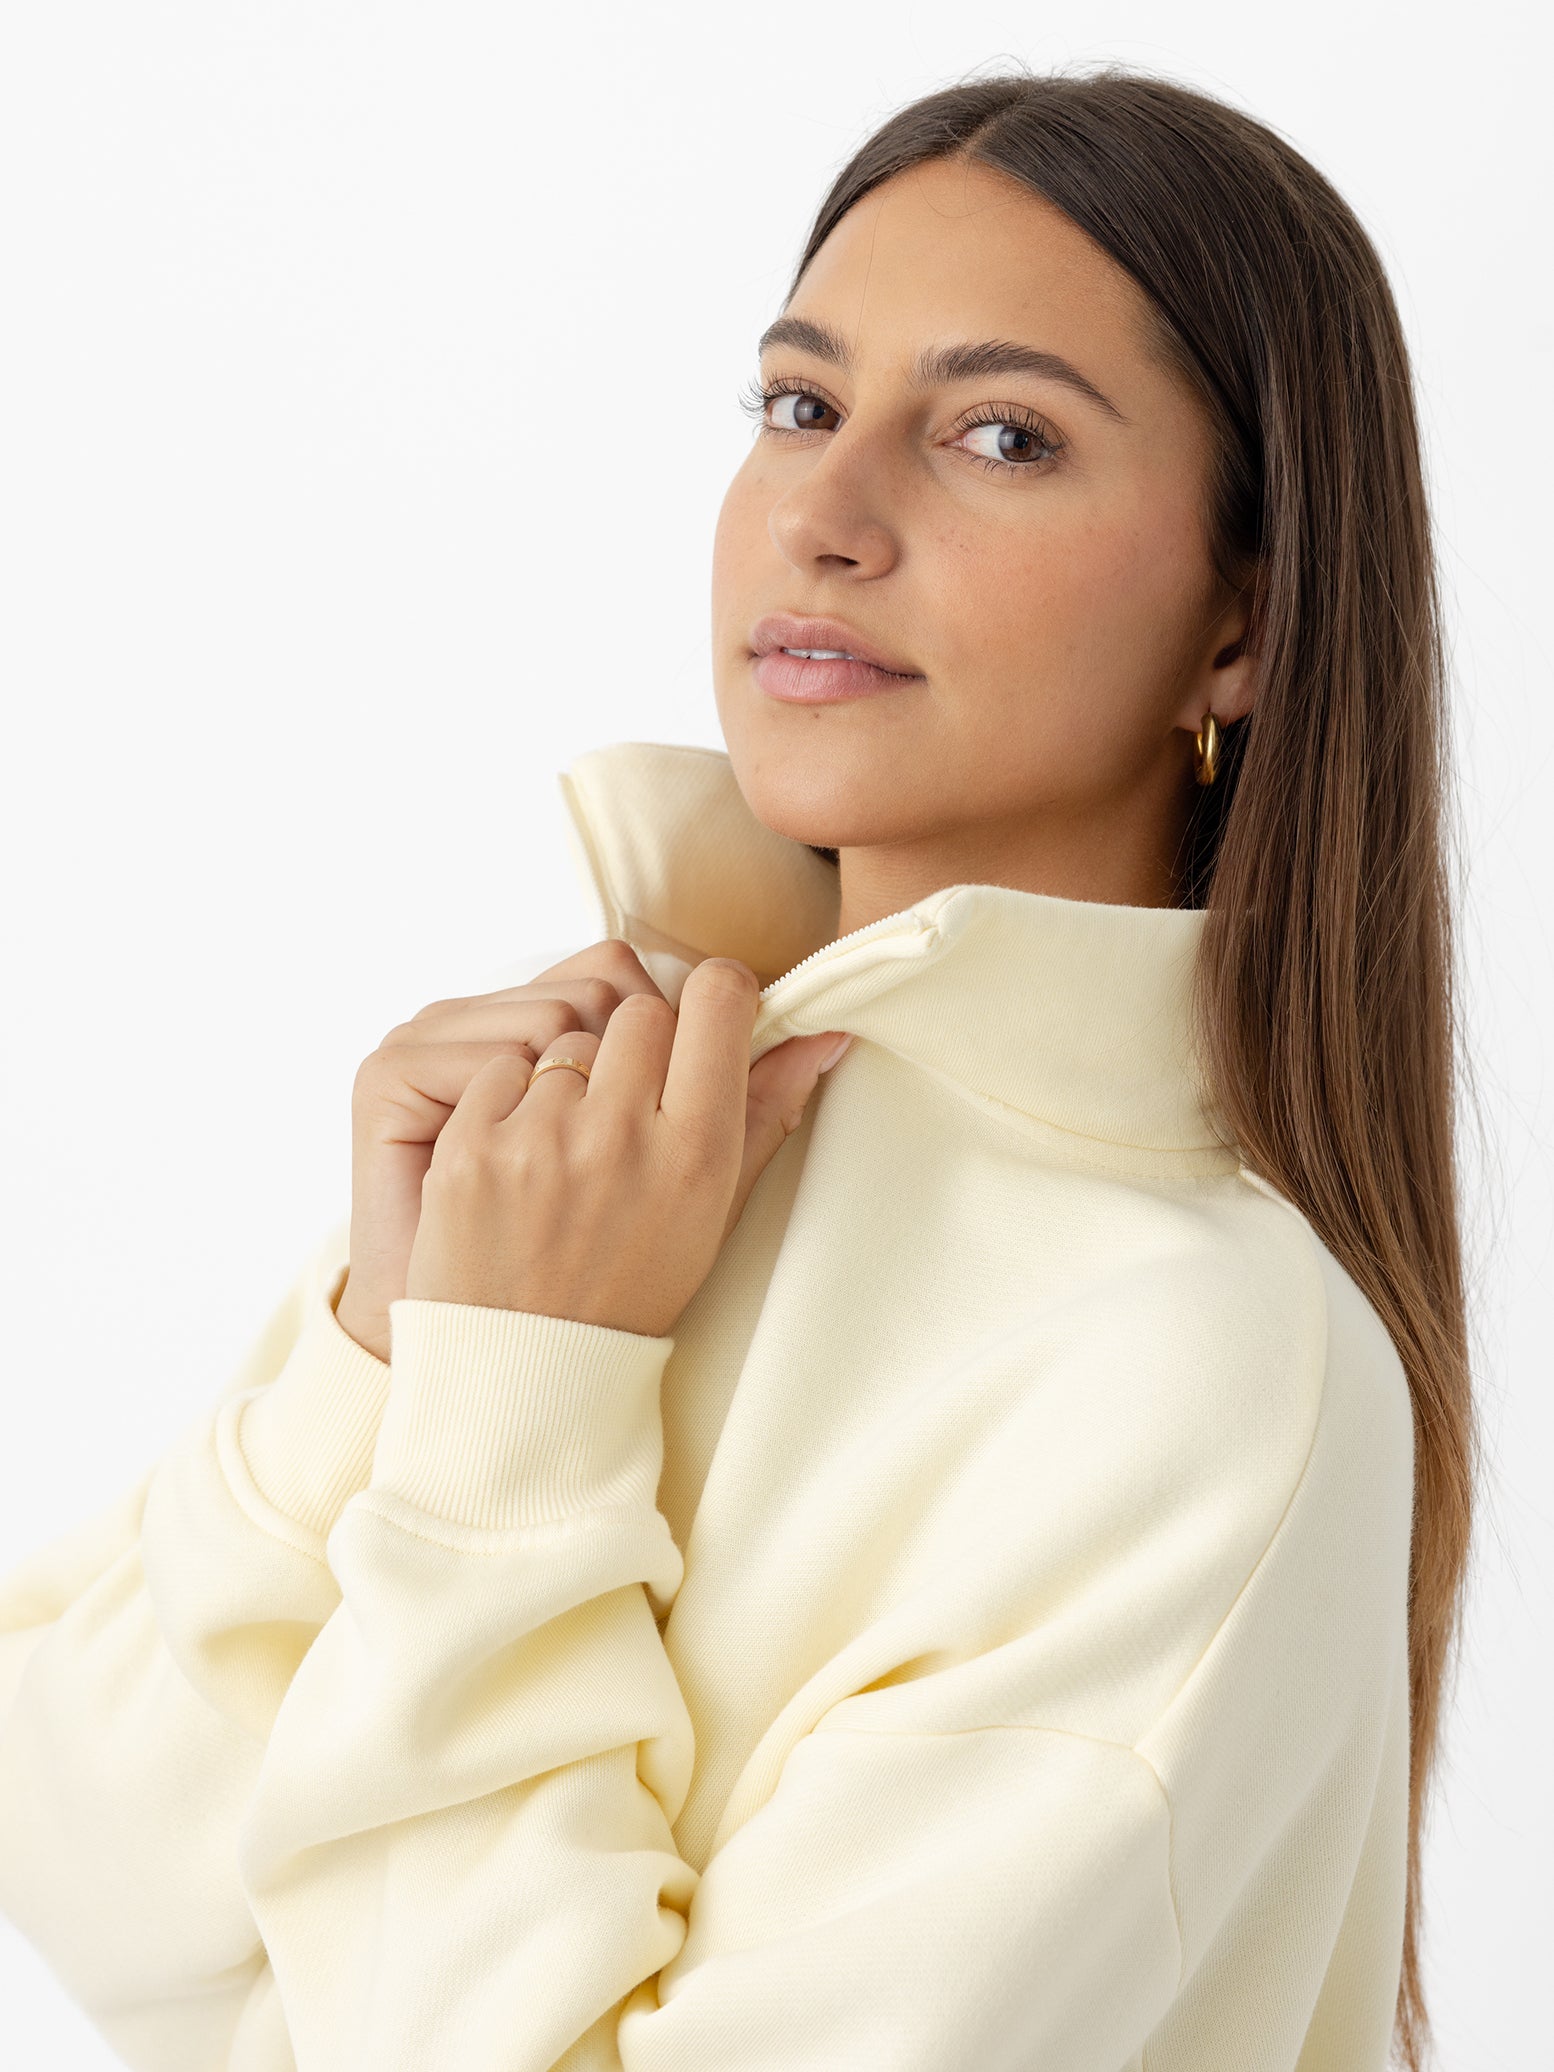 Lemonade CityScape Quarter Zip. The quarter zip is being worn by a female model. The photo was taken with a white background. 